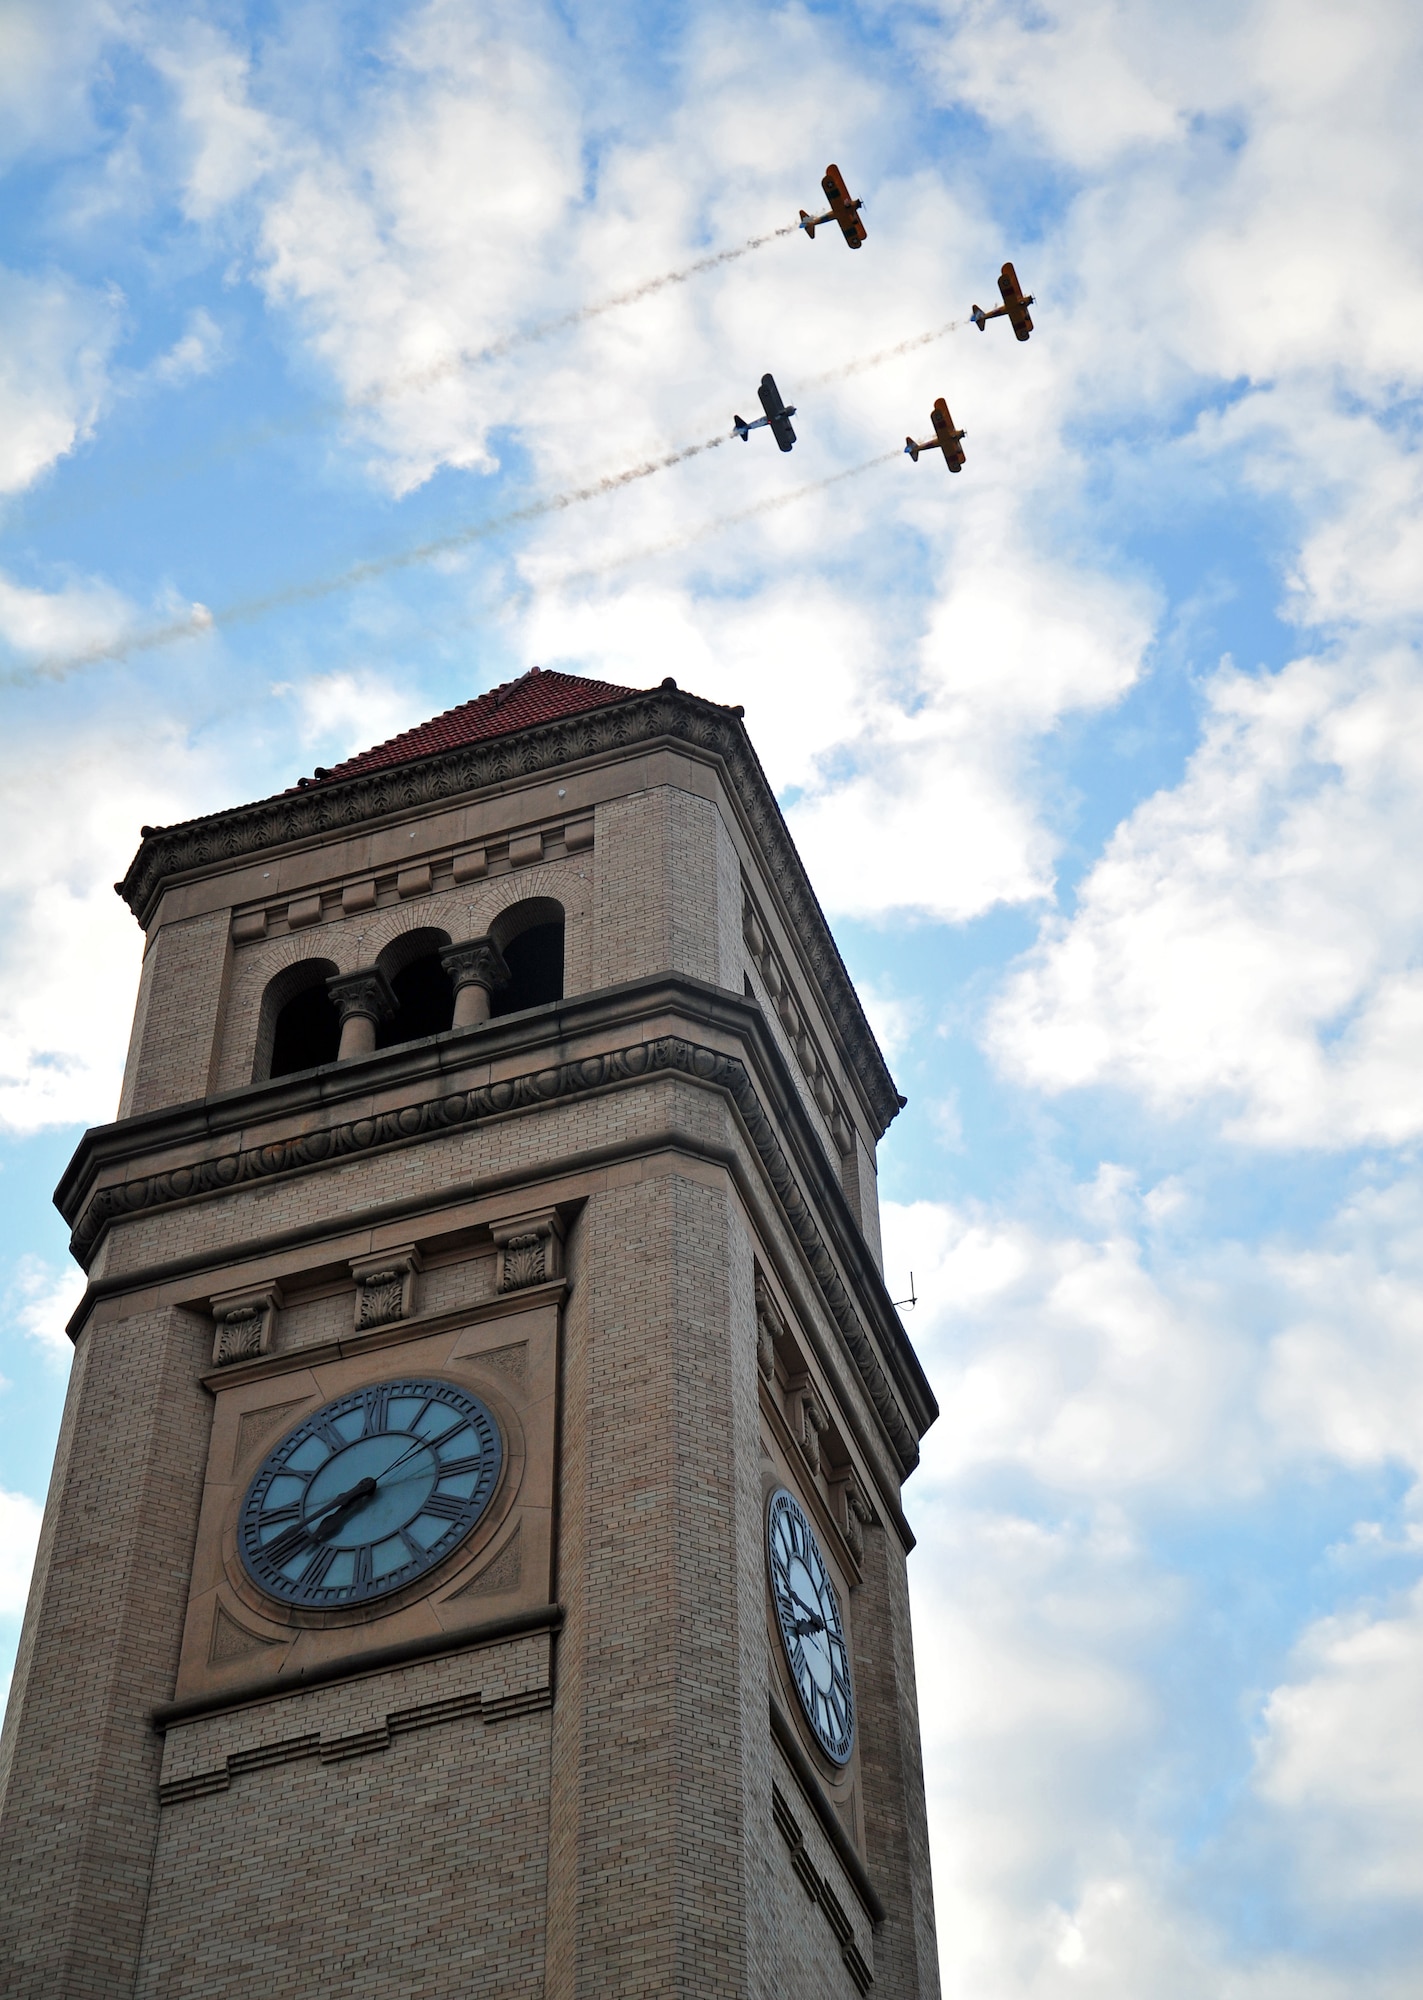 A fly-over was seen above the Spokane clock tower during the Lilac Festival’s Armed Forces Torchlight Parade in Spokane, Wash., May 18, 2013. The parade is considered the nation’s largest Torchlight Parade on Armed Forces Day. (U.S. Air Force photo by Senior Airman Taylor Curry)